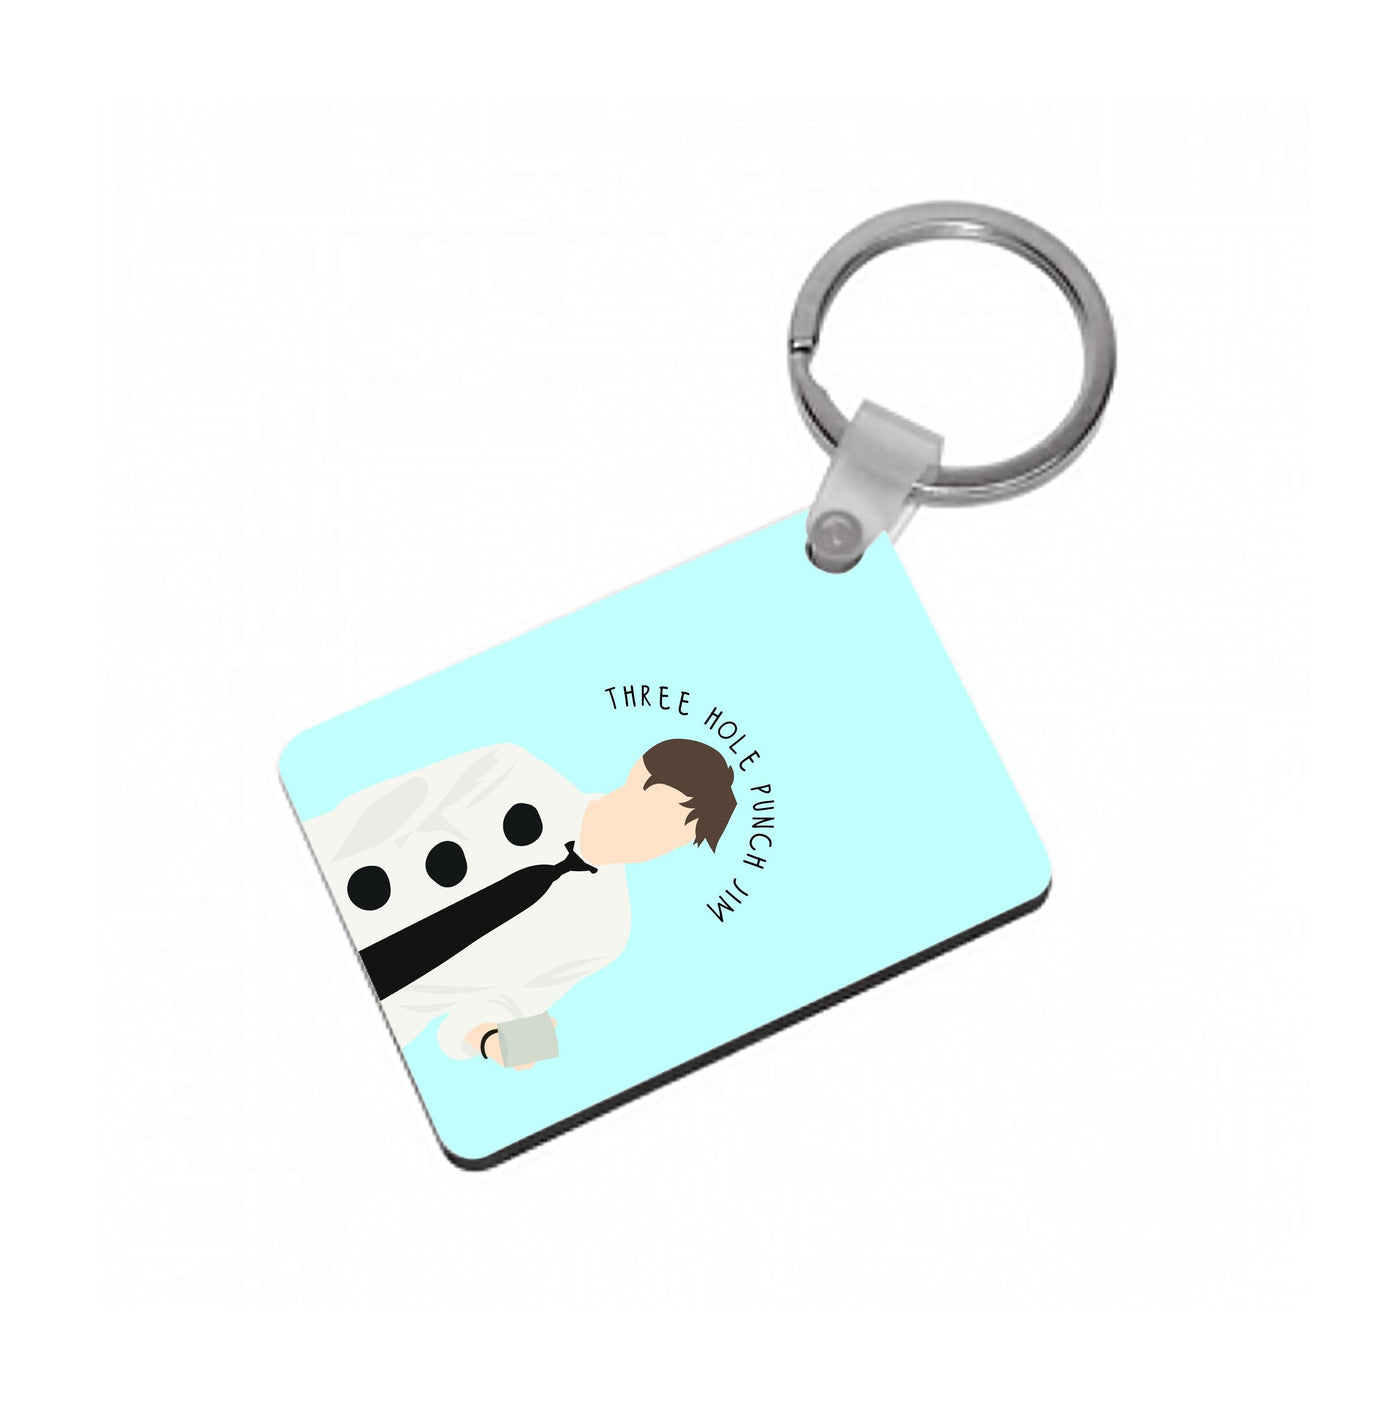 Three Hole Punch Jim The Office - Halloween Specials Keyring